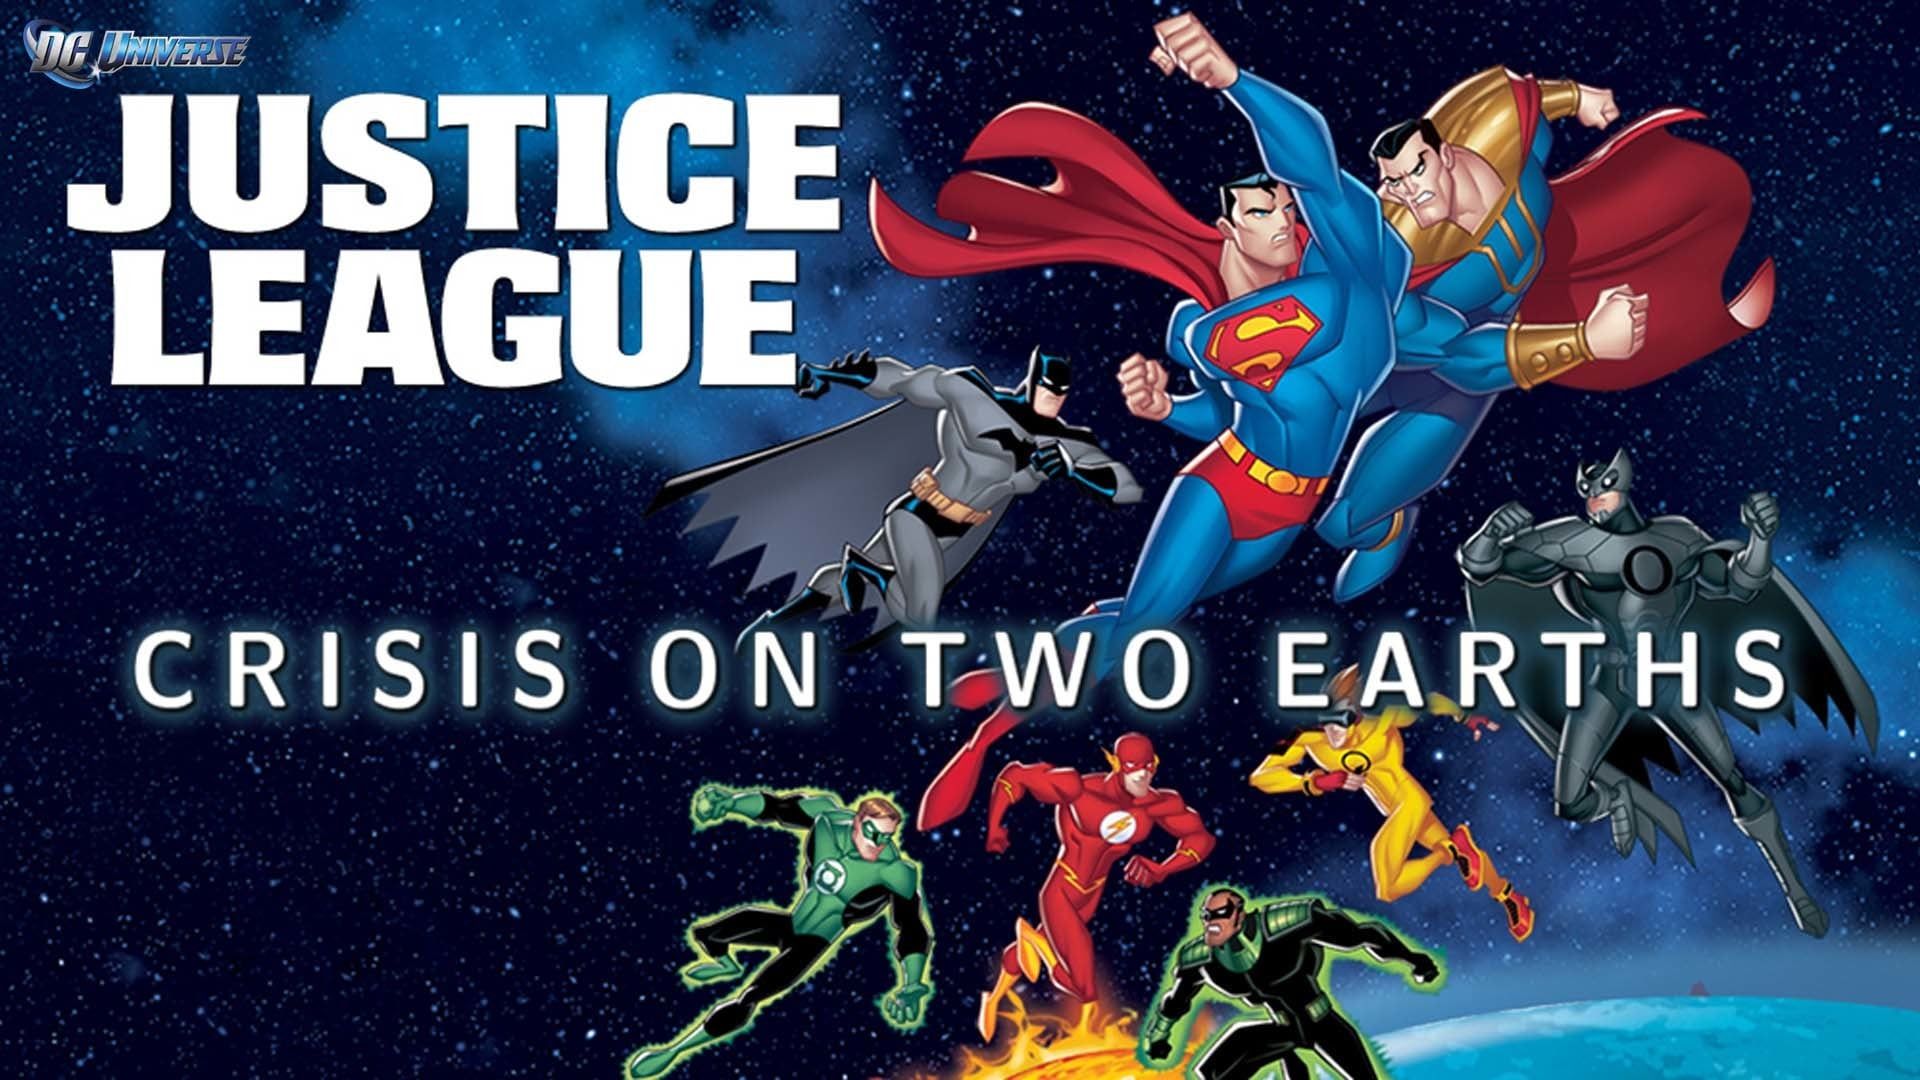 Justice League: Crisis on Two Earths (2010) on HBO MAX or Streaming Online